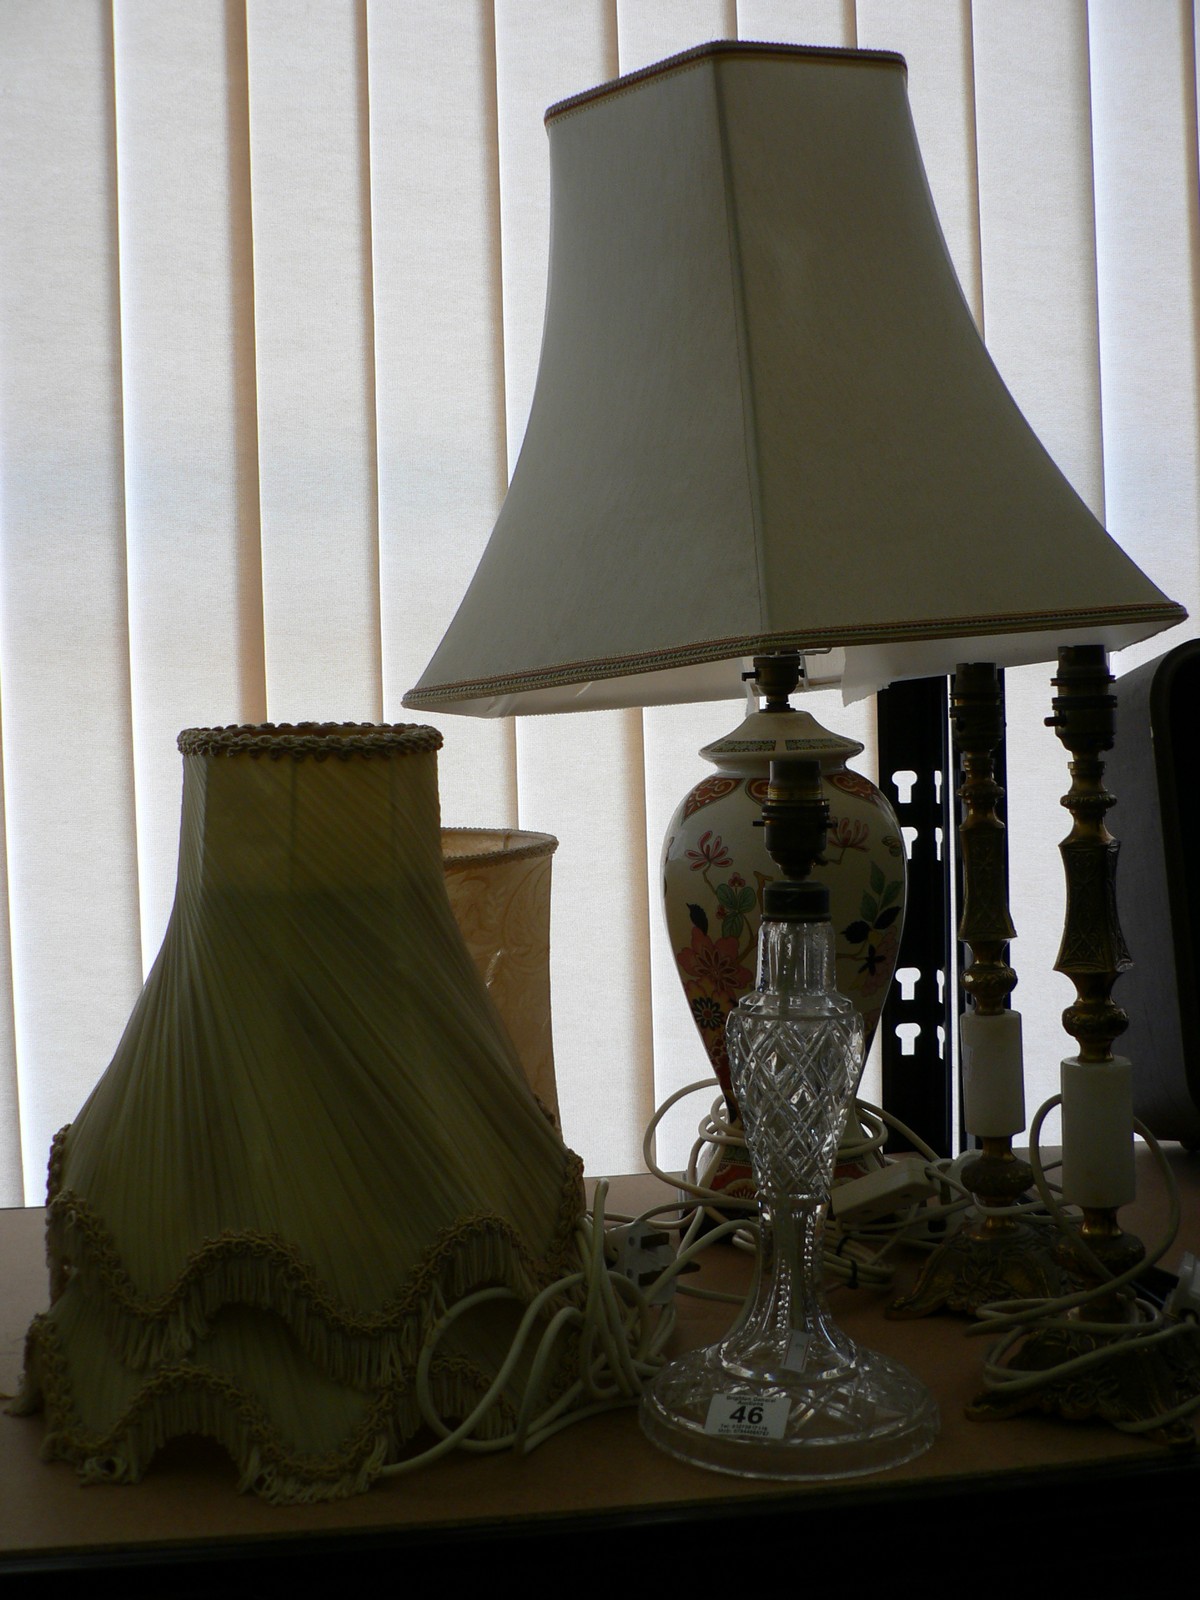 4 TABLE LAMPS WITH SHADES